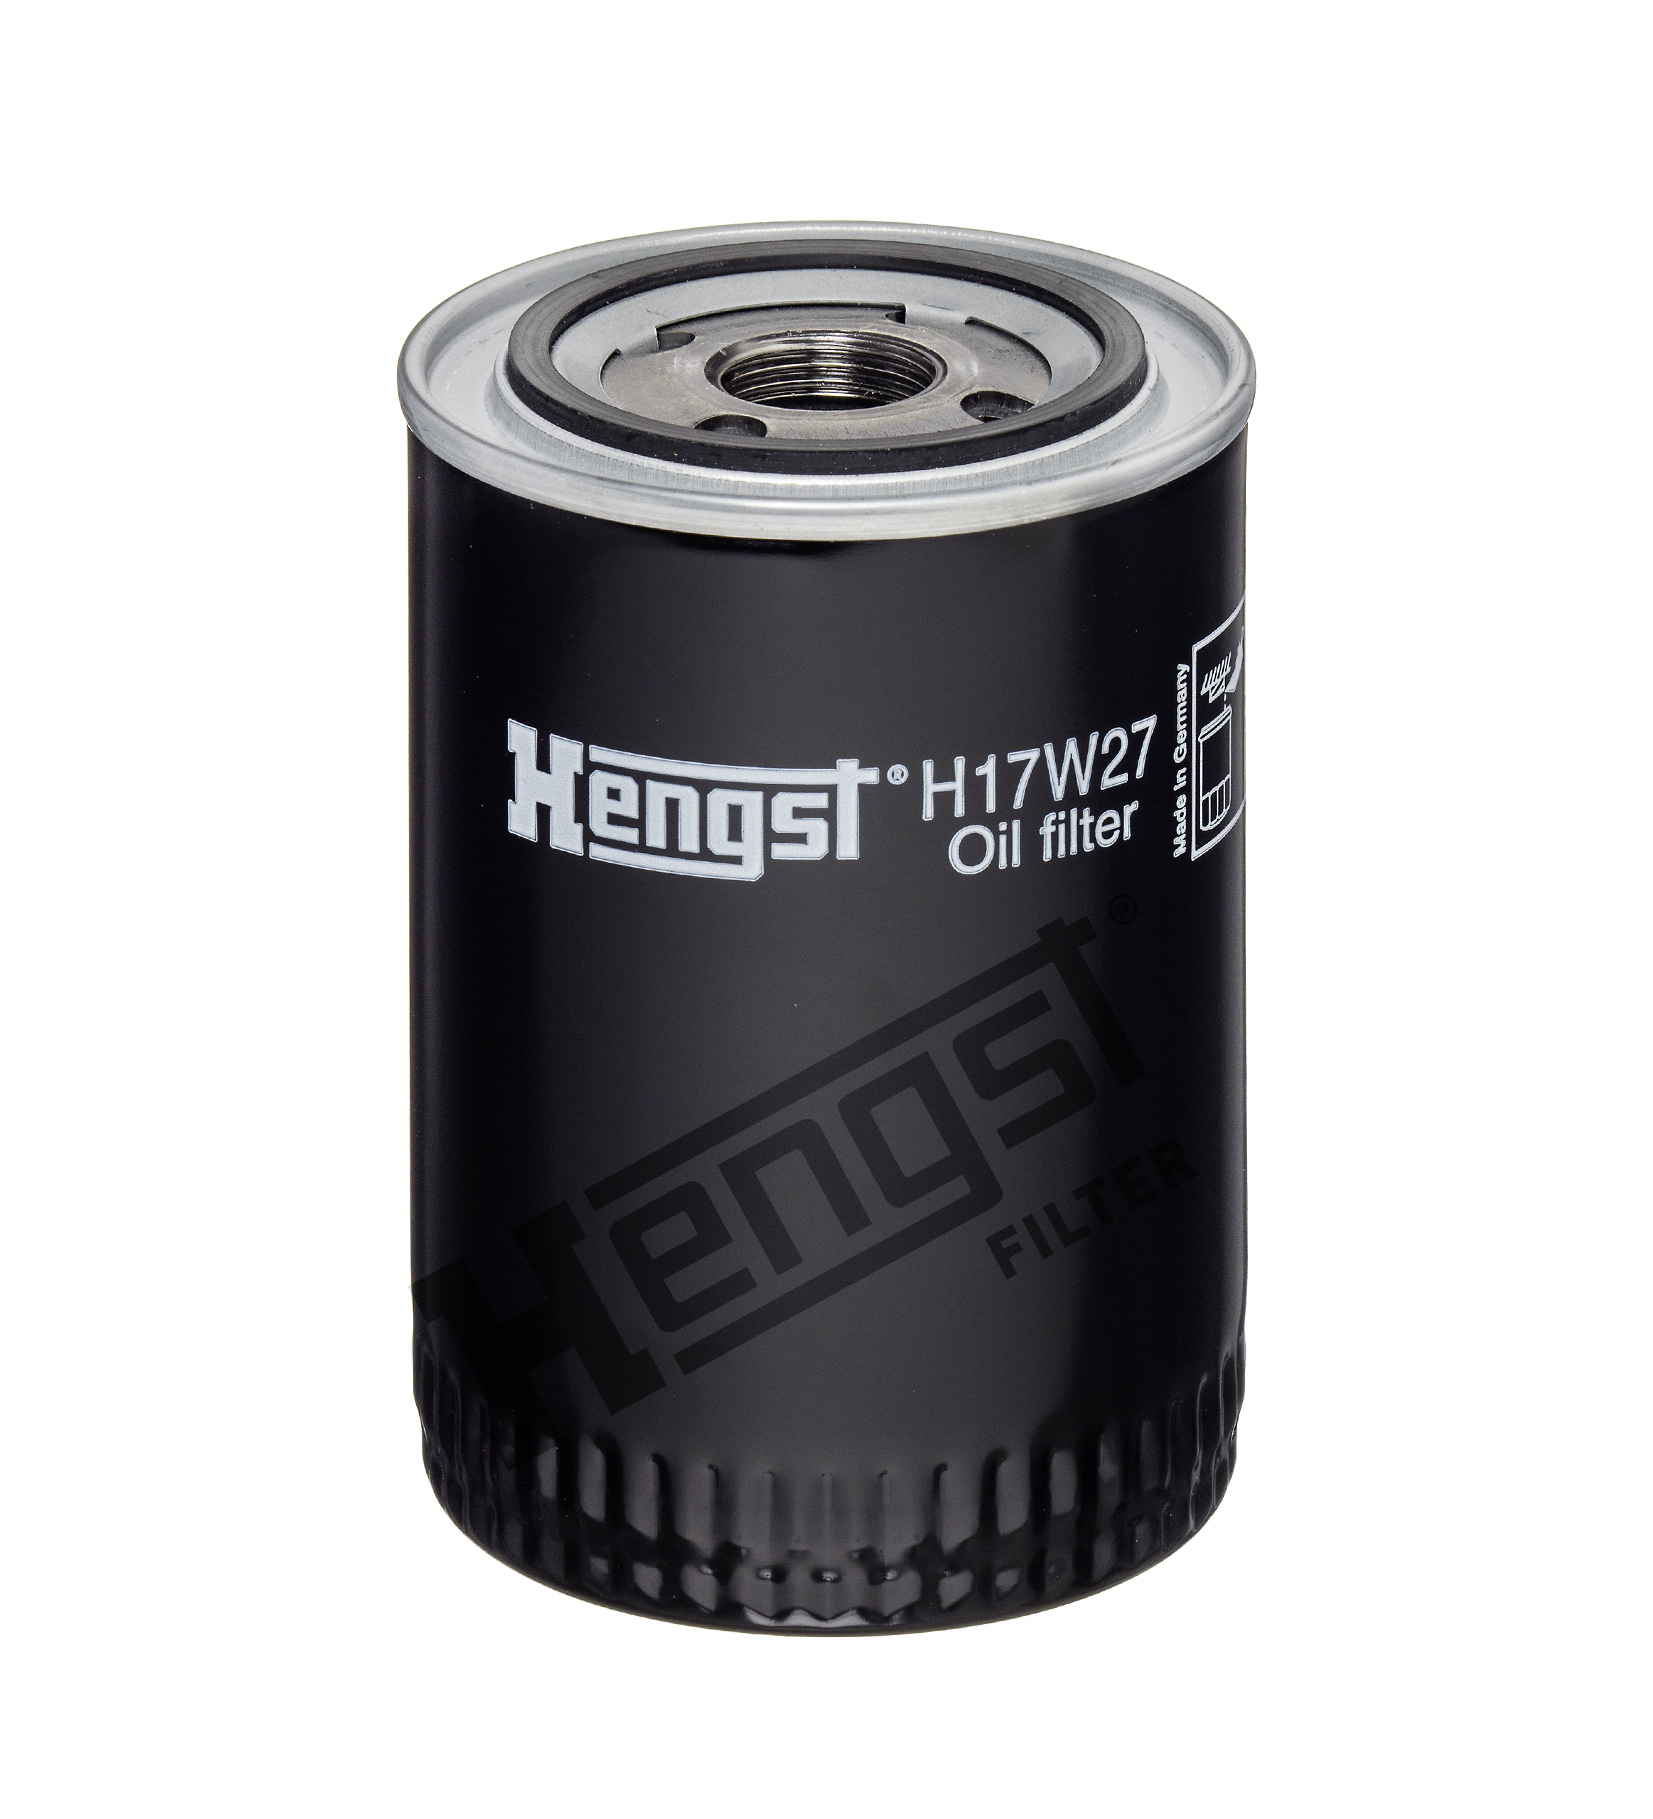 H17W27 oil filter spin-on